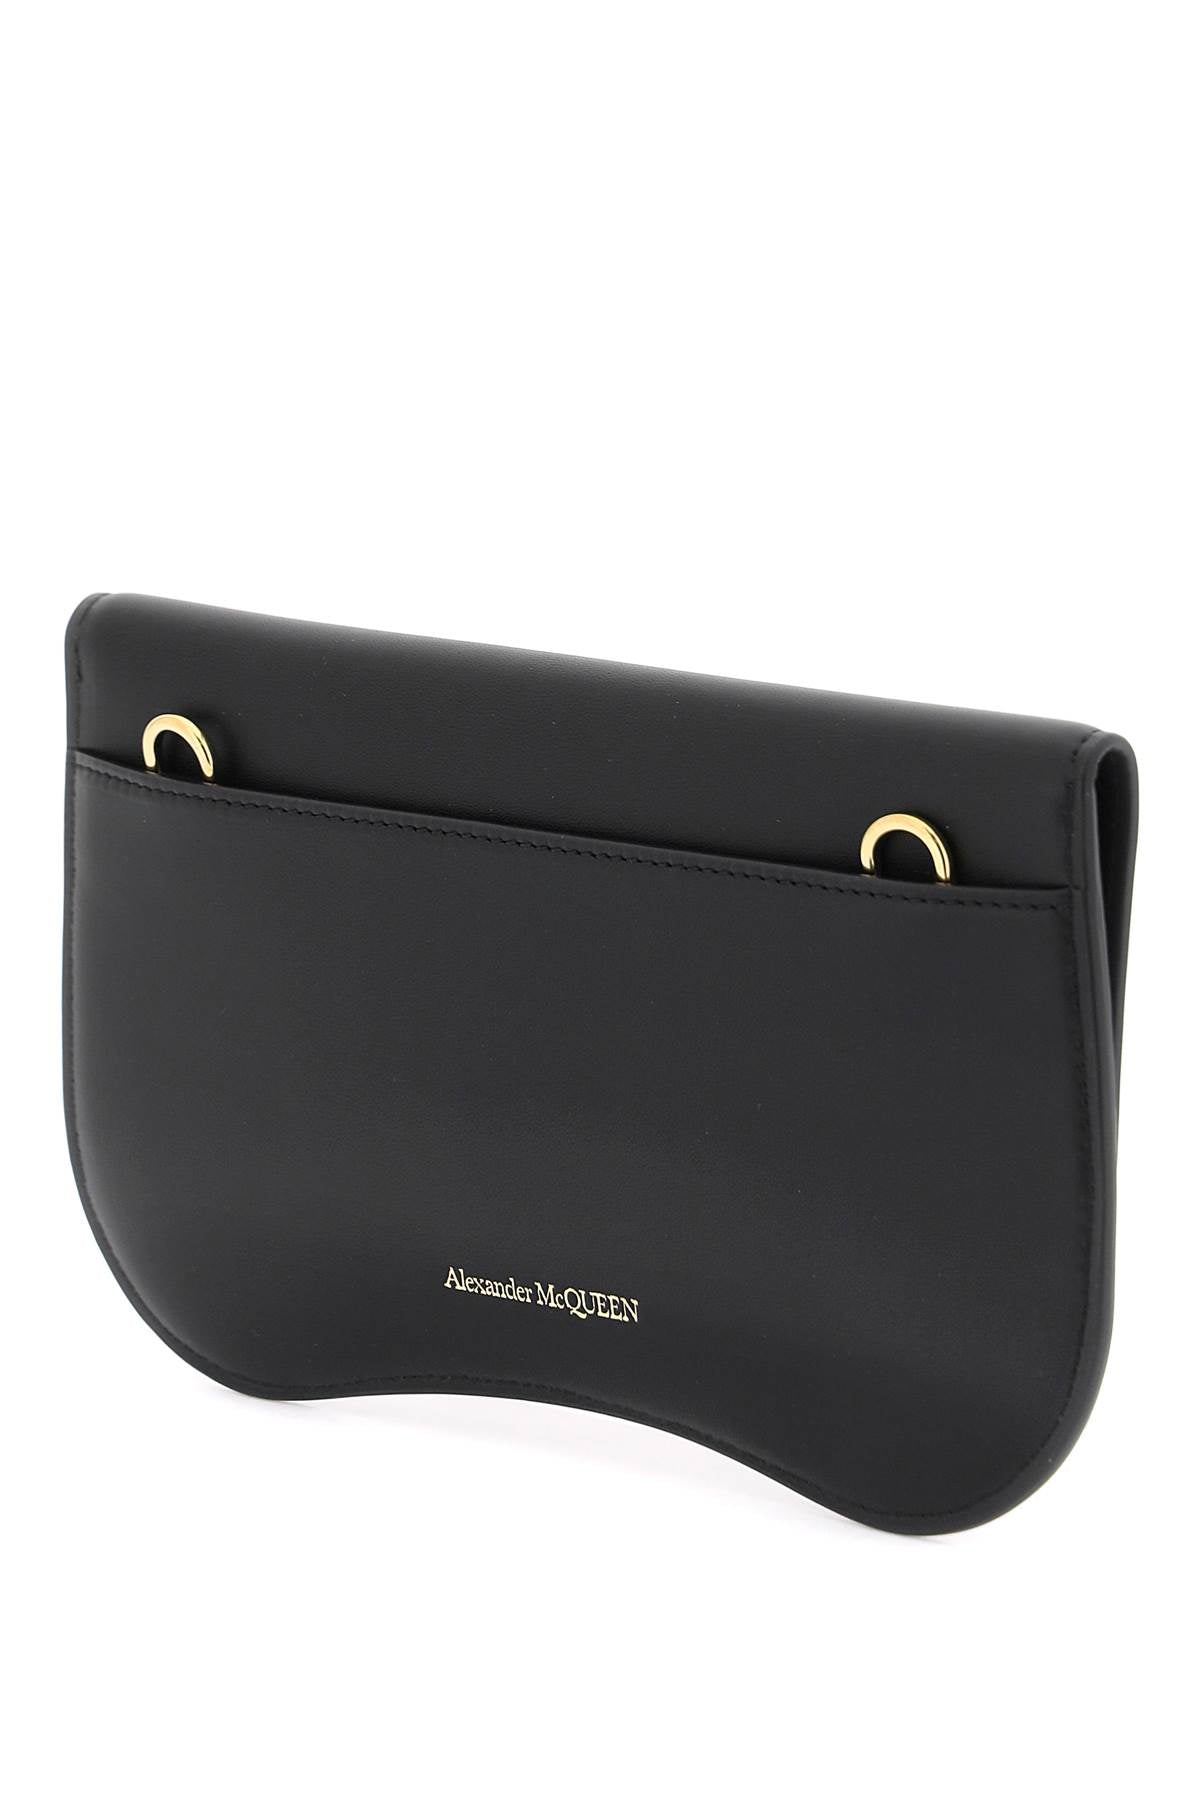 ALEXANDER MCQUEEN Laminated Leather Pouch Handbag with Gold Metal Seal Logo and Magnetic Closure